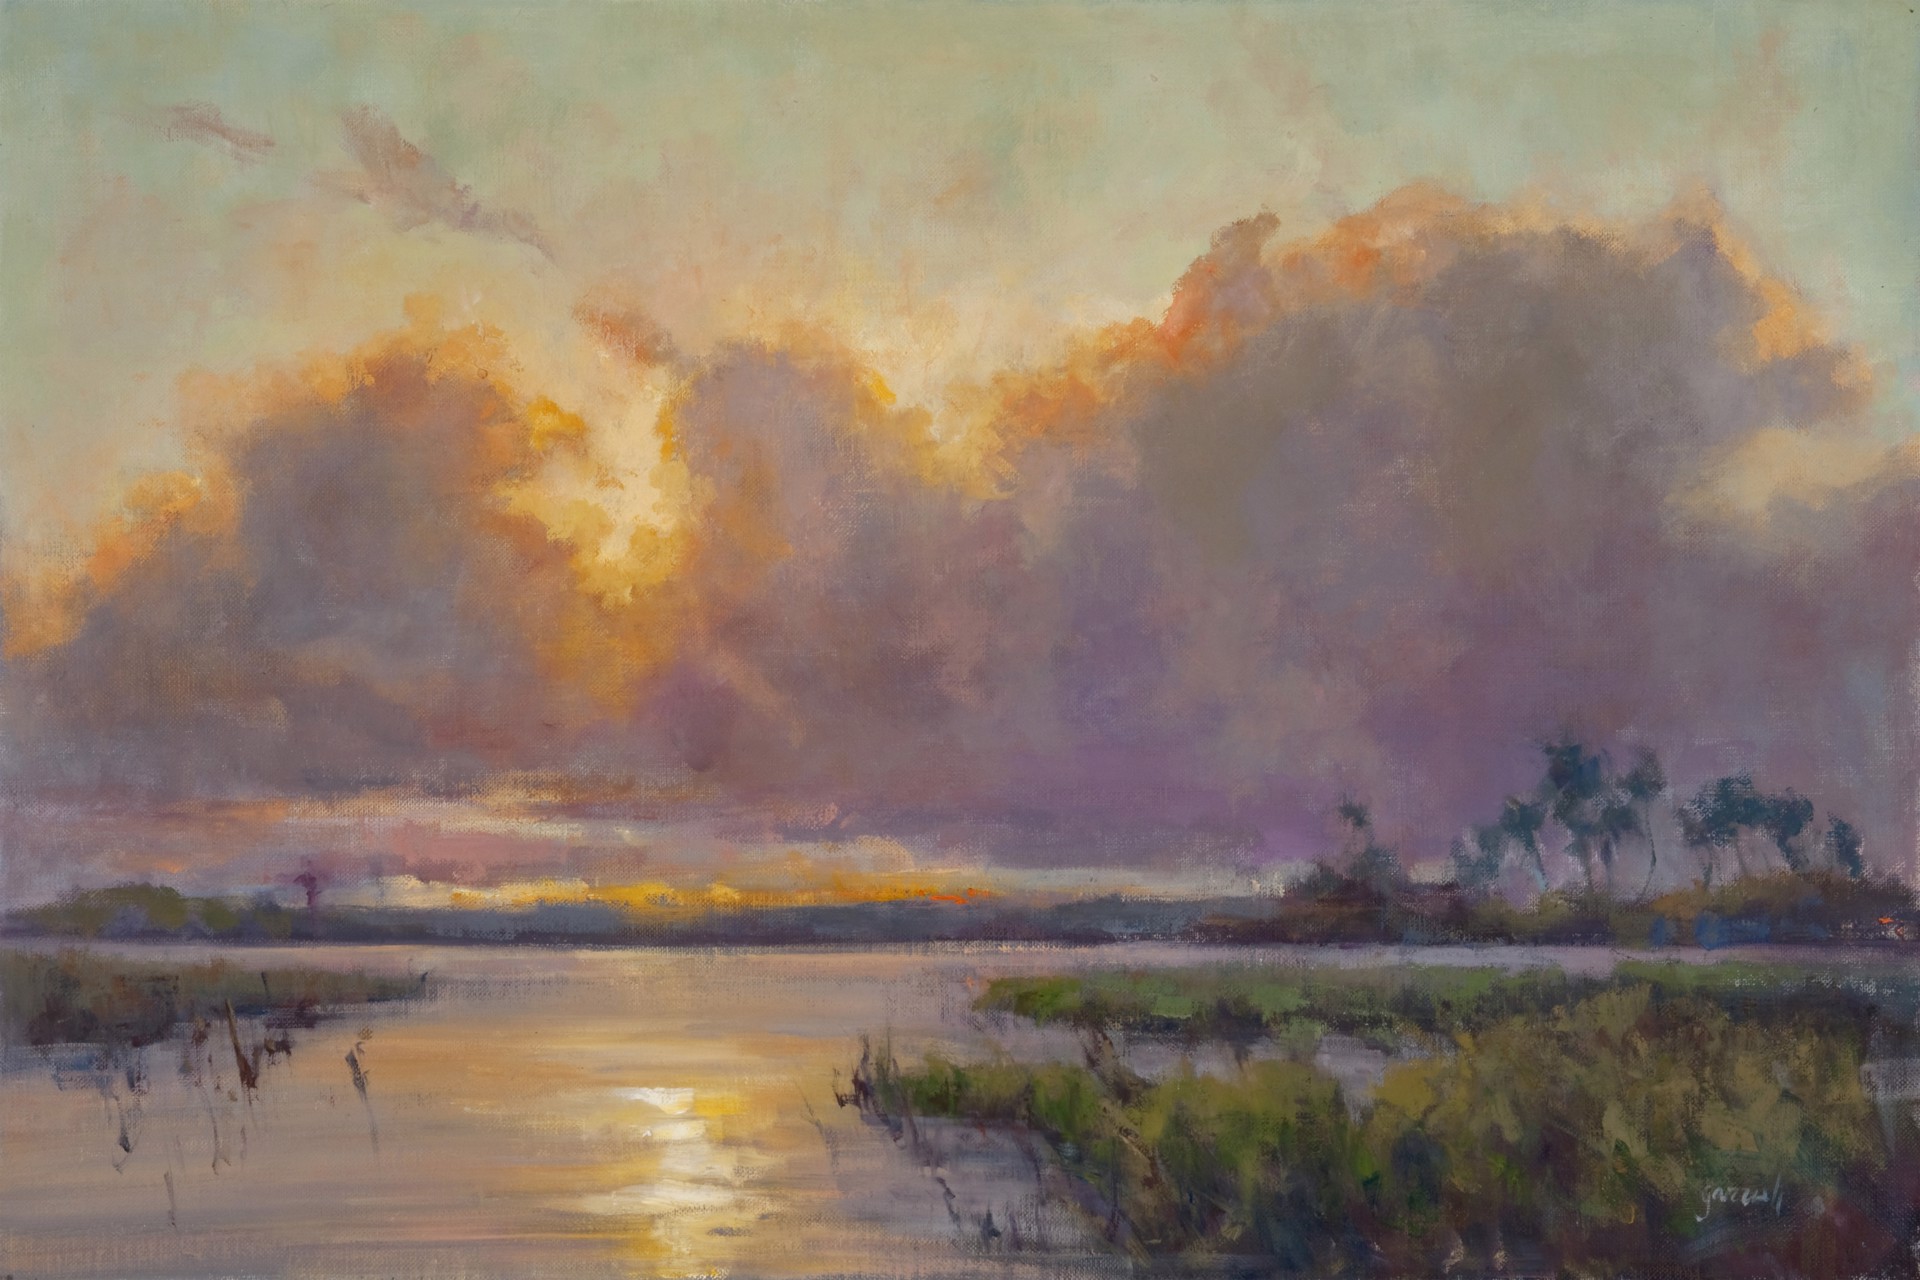 "Serenity at Twilight" original oil painting by Mary Garrish